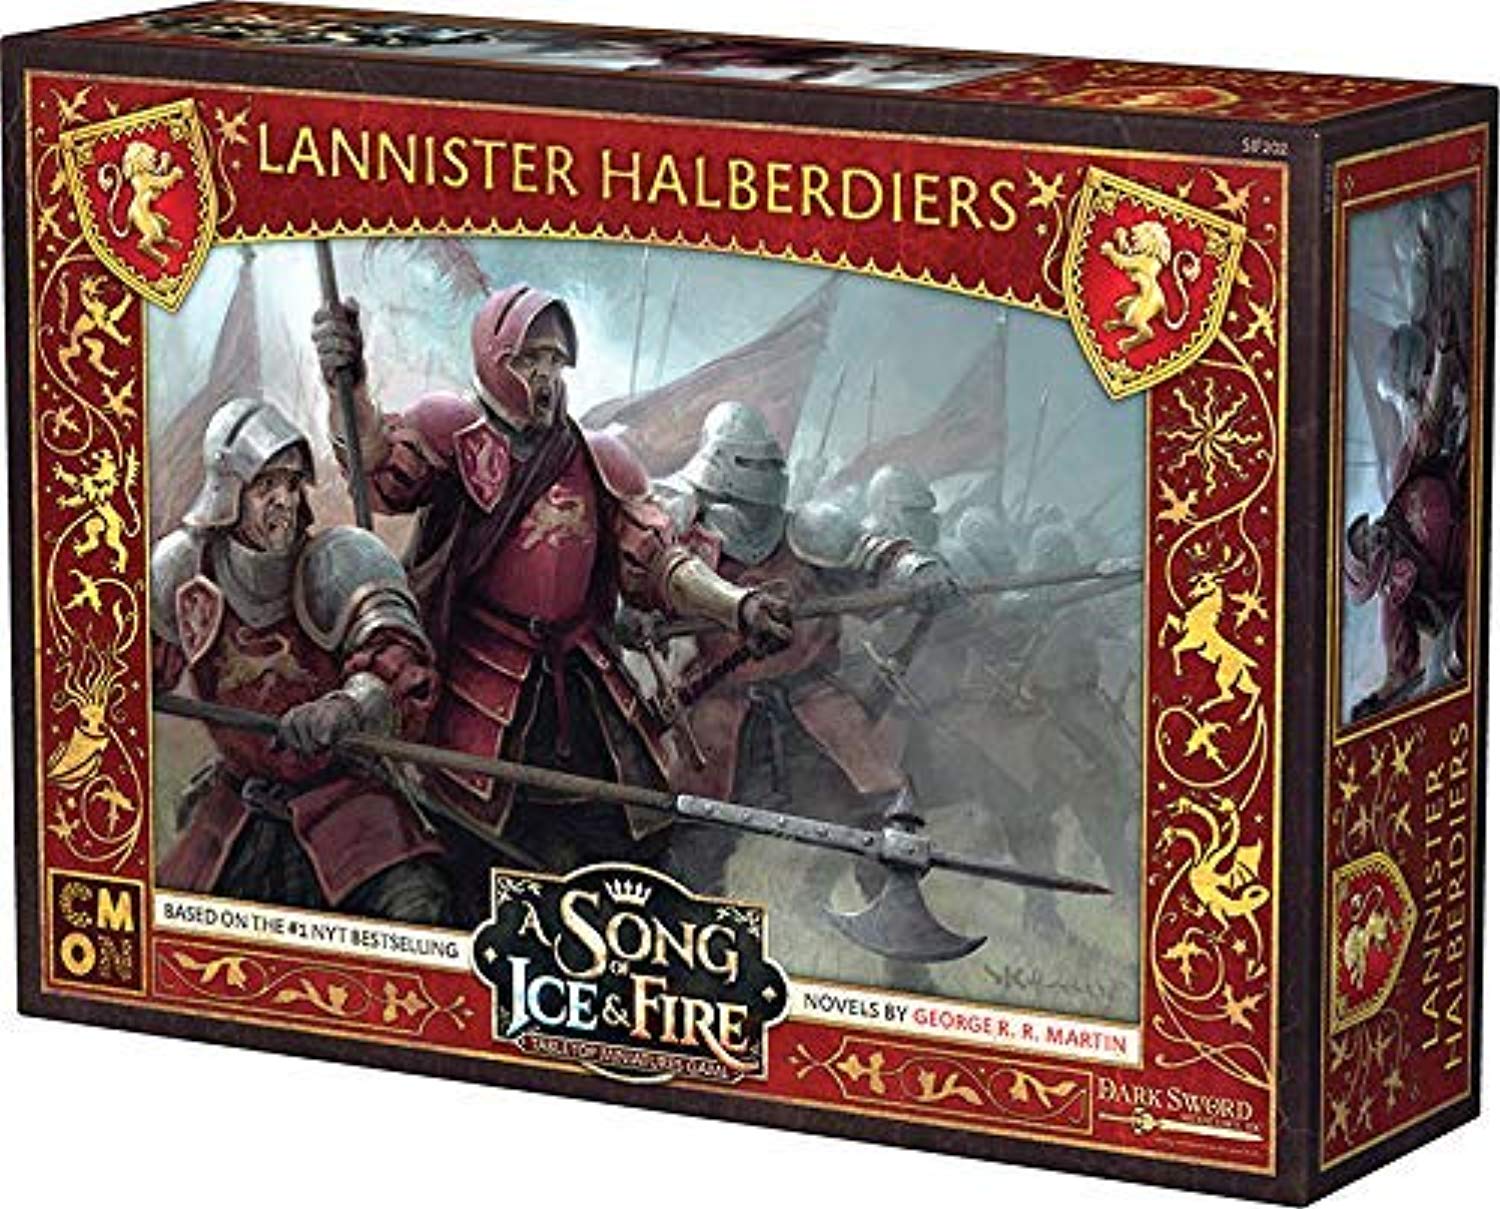 A Song of Ice & Fire: Tabletop Miniatures Game Lannister Halberdiers Unit Box, by CMON - image 5 of 8